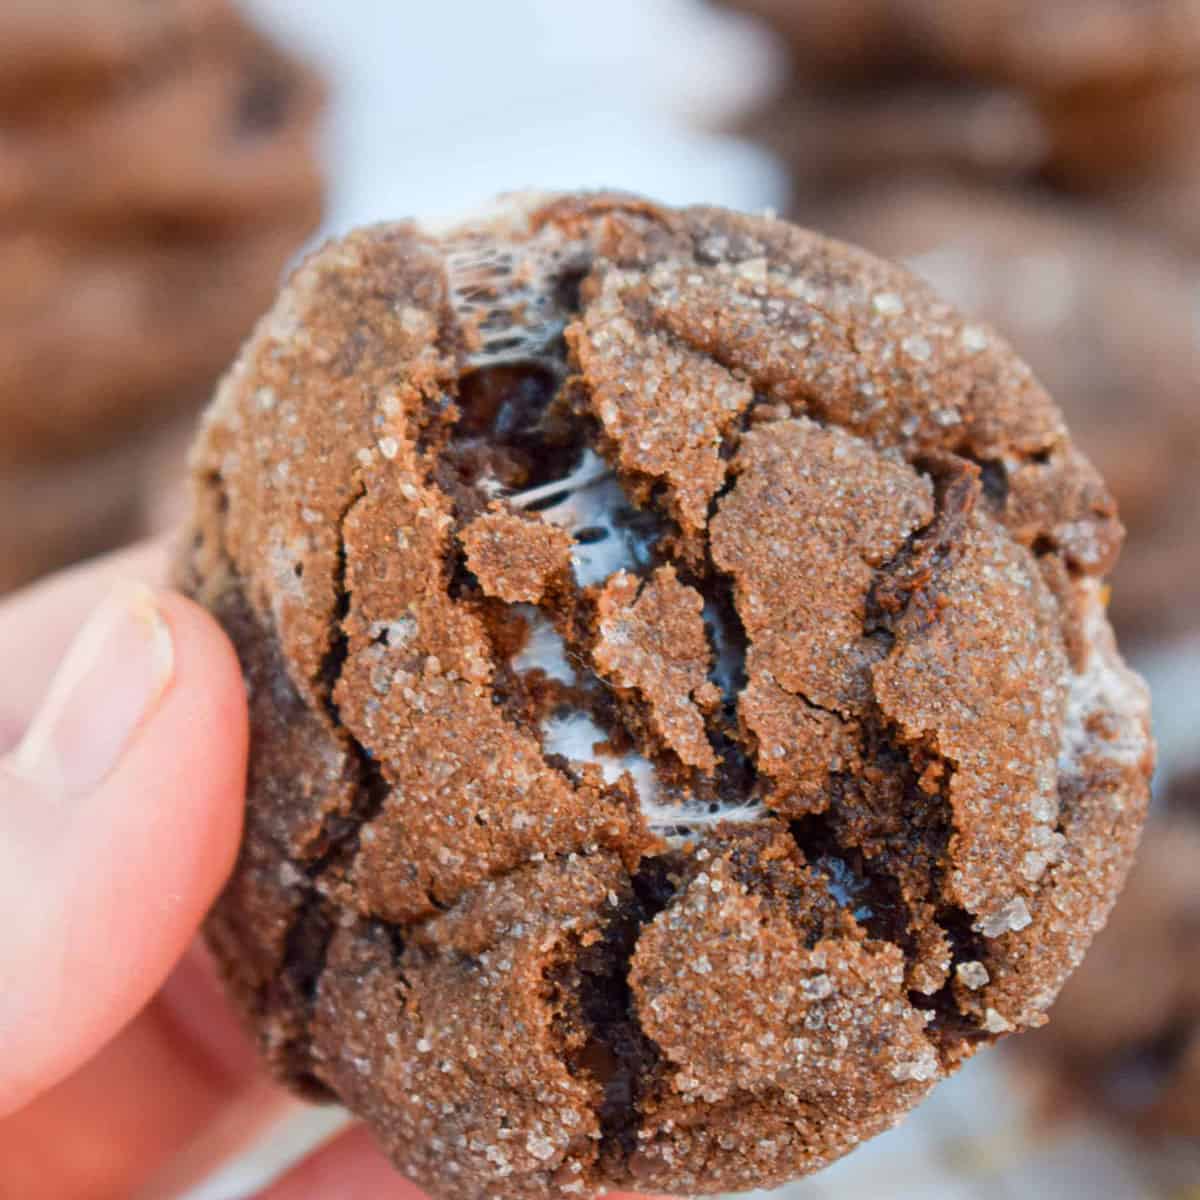 A chocolate cookie with a gooey white filling.